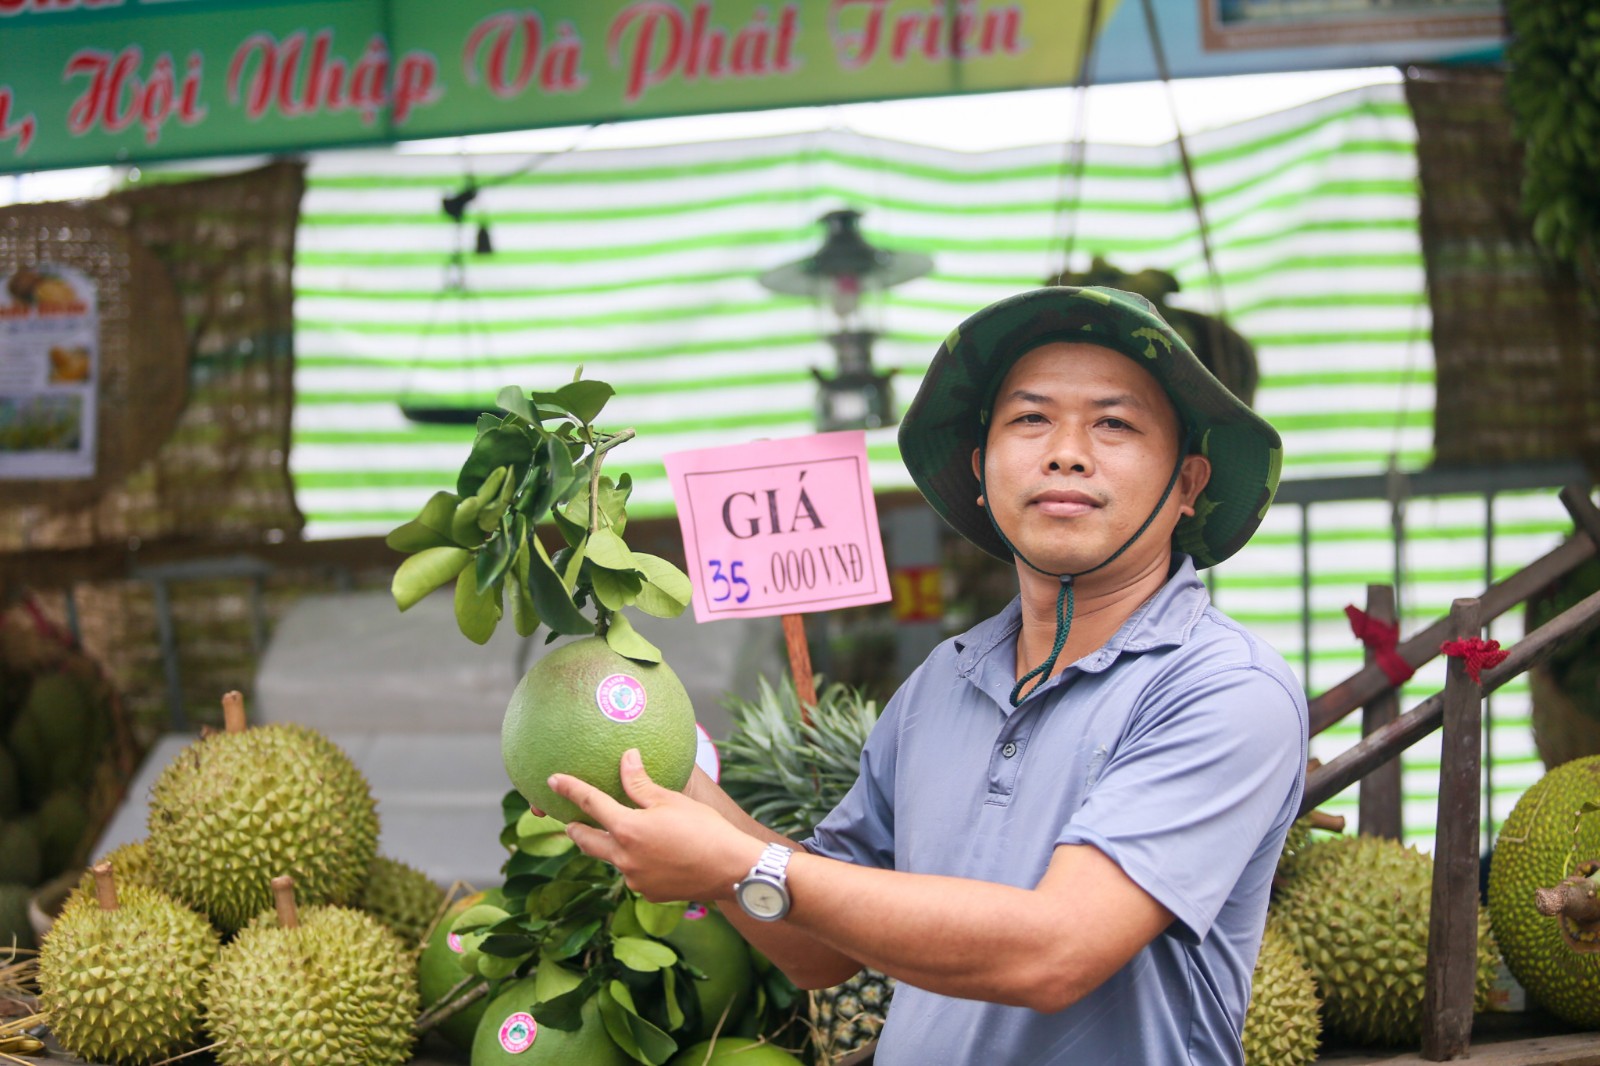 A merchant holds a pomelo at his stall at the ‘Tren ben duoi thuyen’ Fruit Week in District 8, Ho Chi Minh City, May 28, 2022. Photo: Chau Tuan / Tuoi Tre